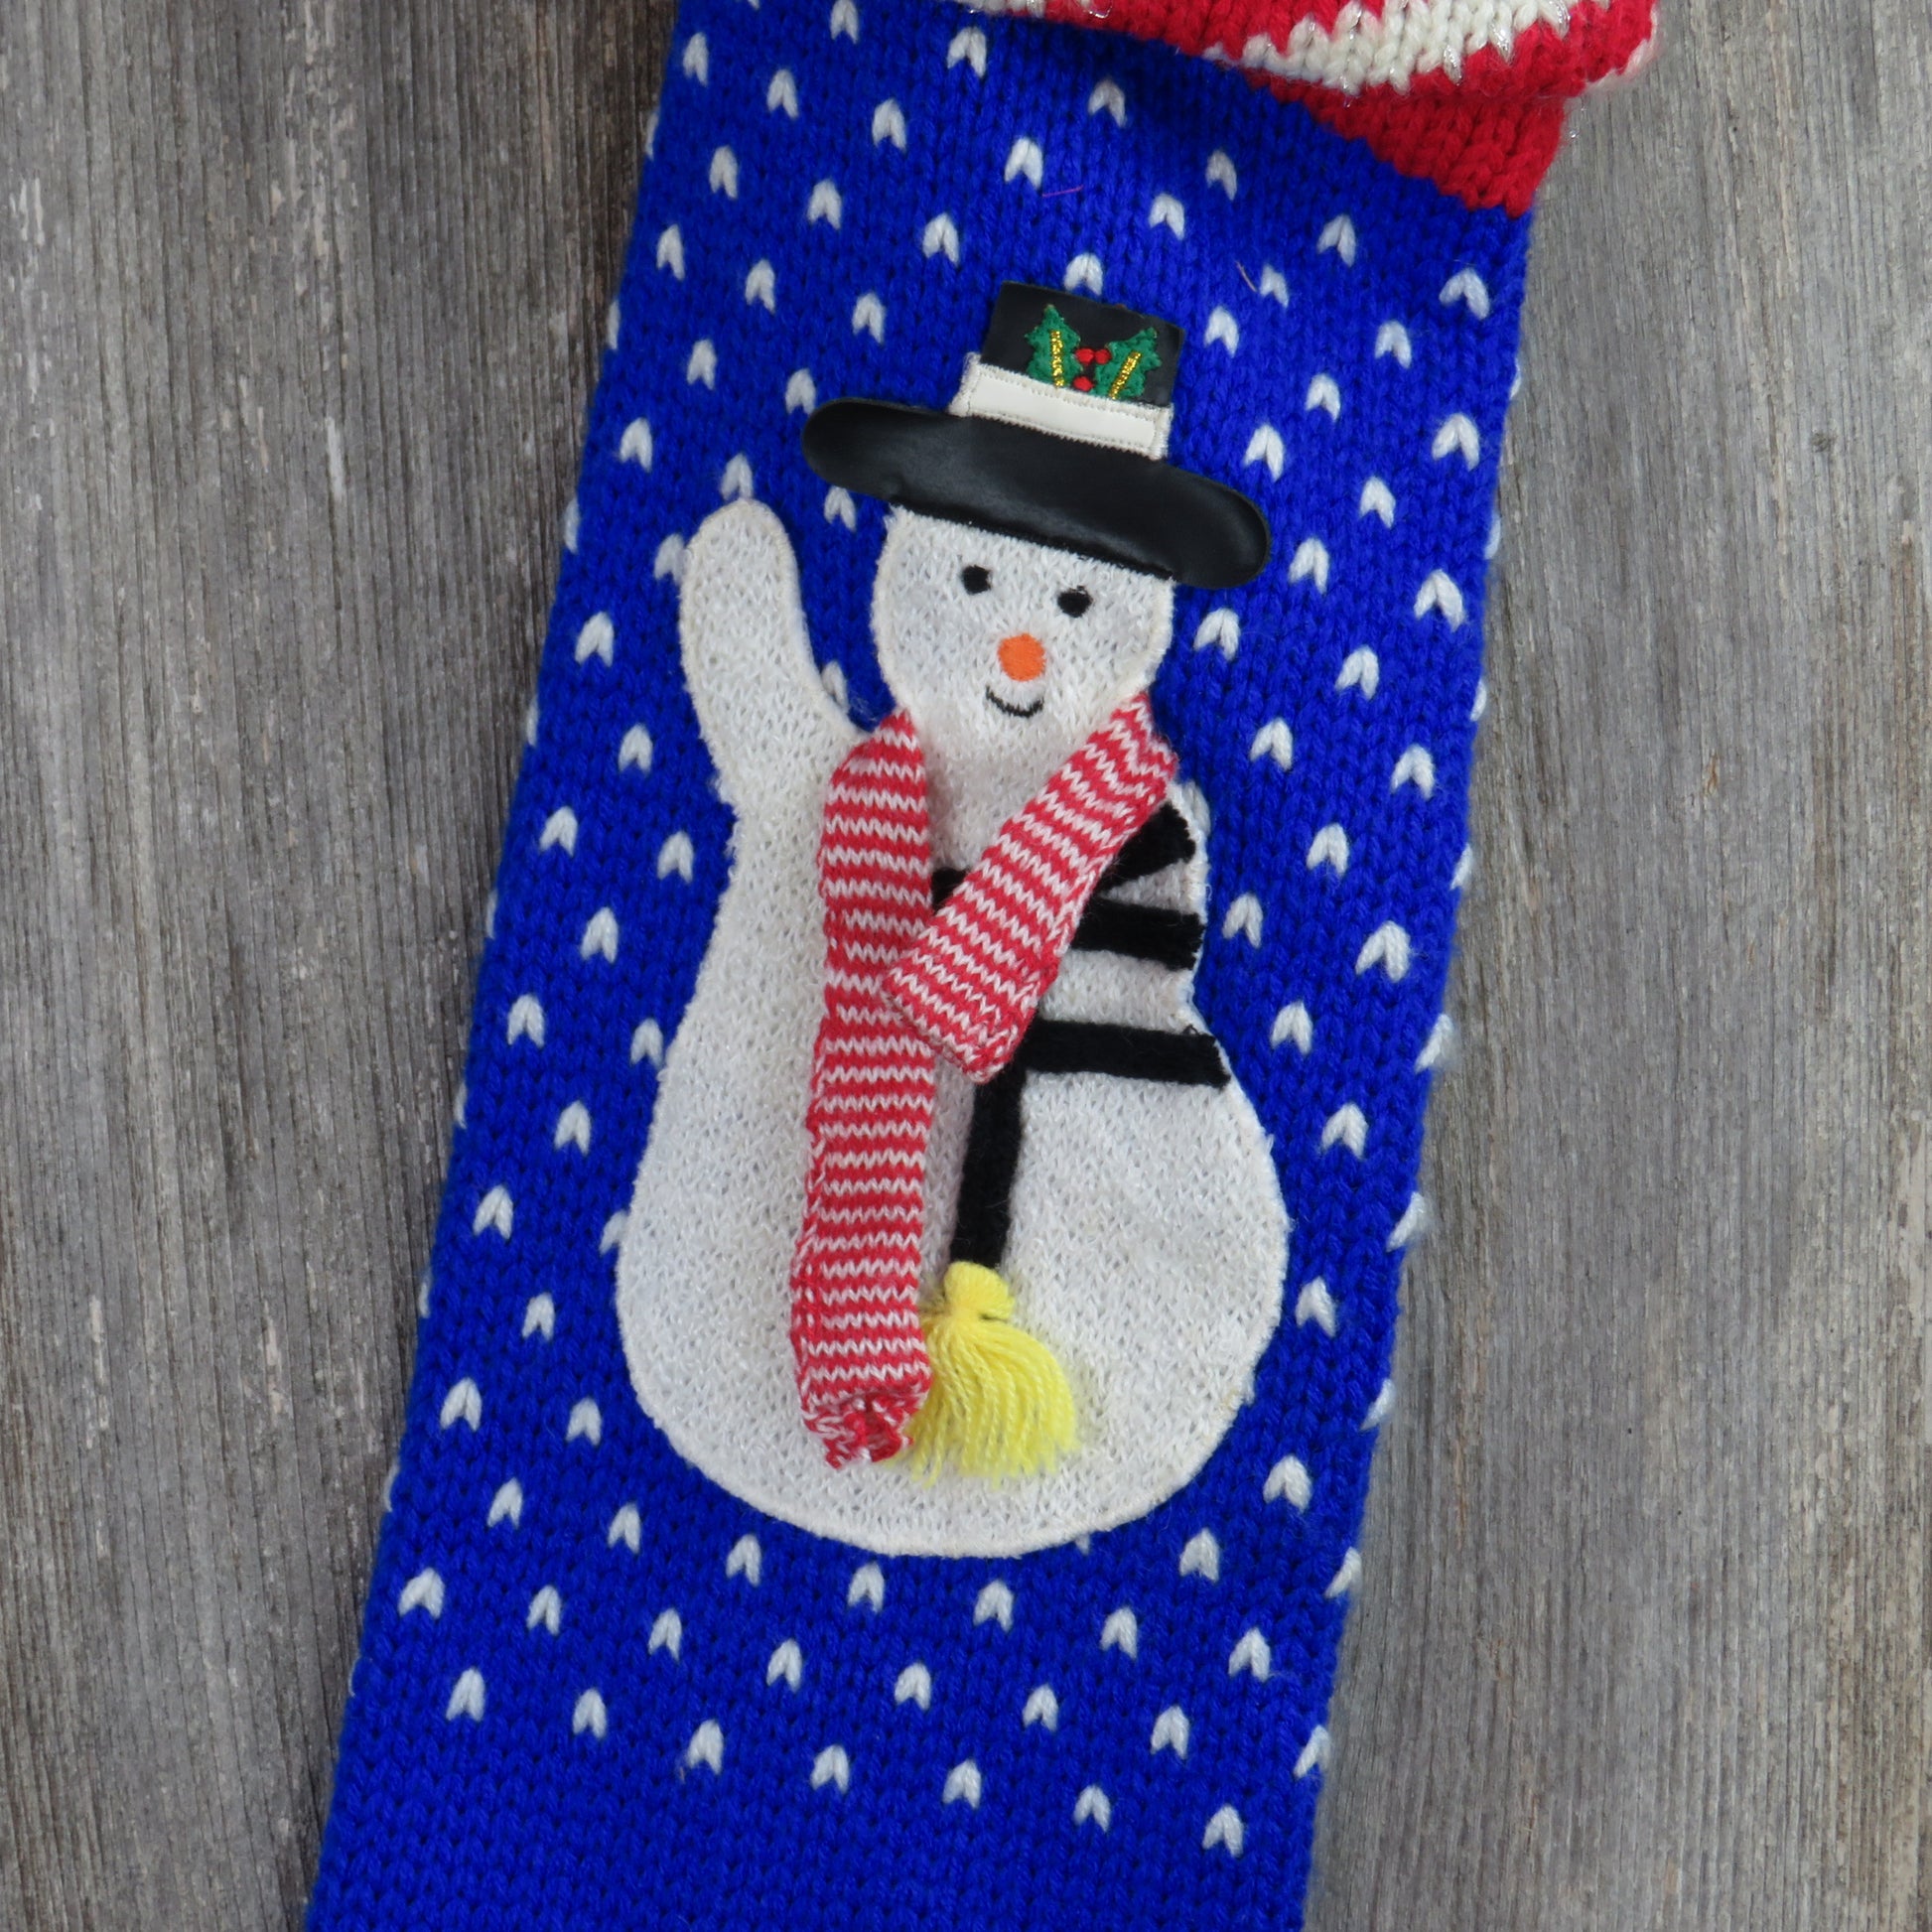 Vintage Knit Christmas Stocking Applique Snowman Frosty Blue Red Chunky ST107 - At Grandma's Table